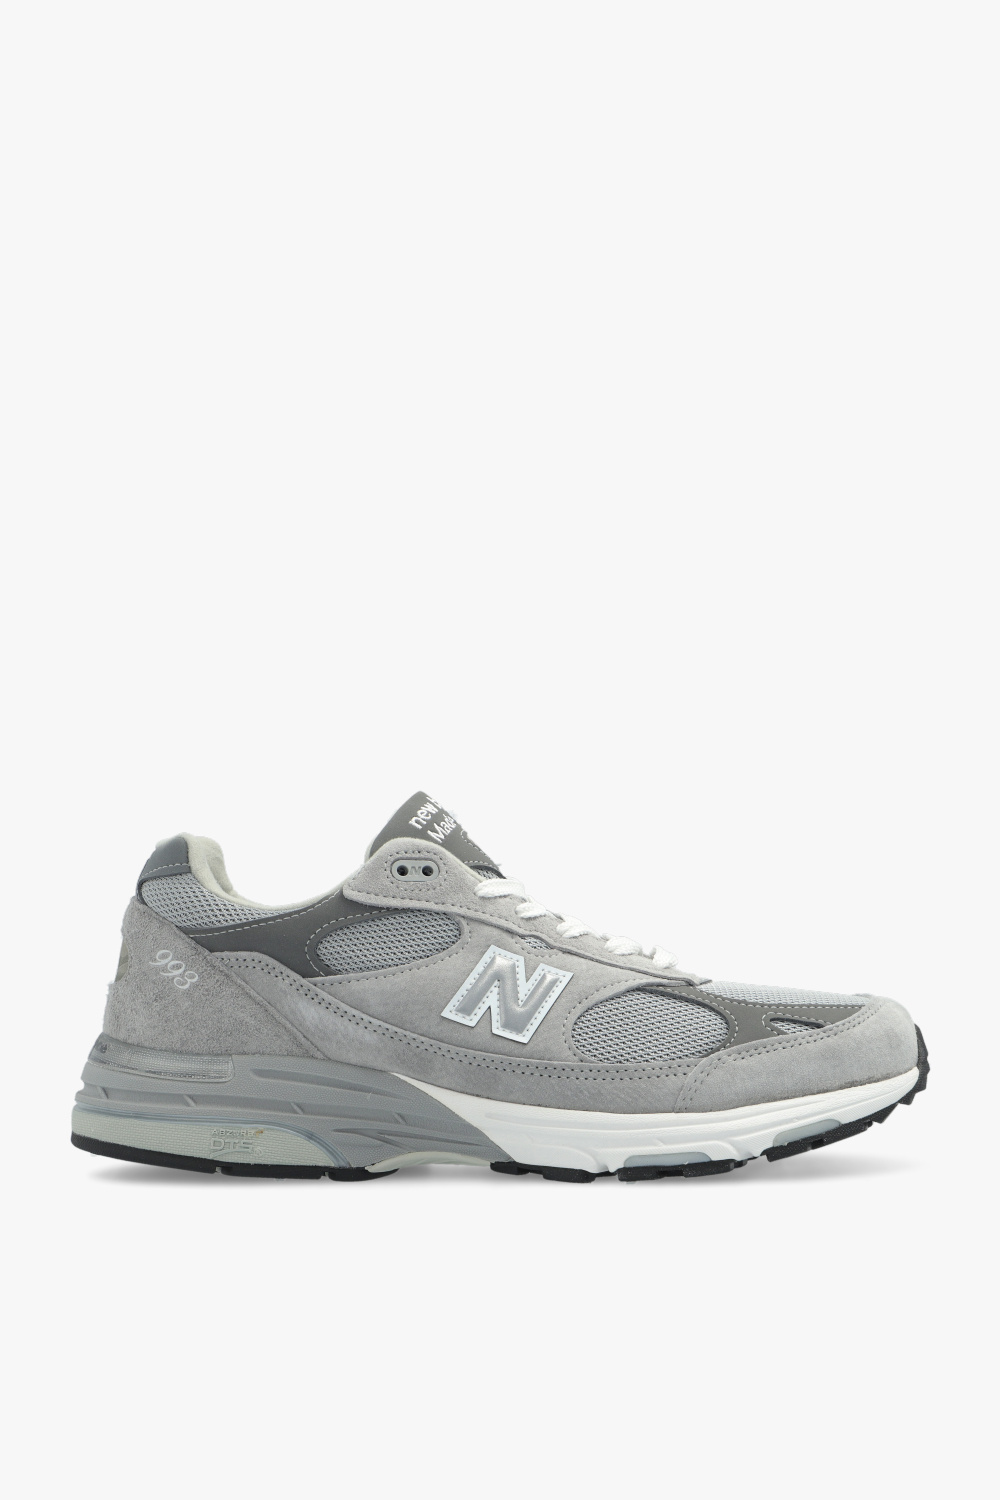 New Balance 'MR993GL' sneakers from 'Made in UK' series | Men's